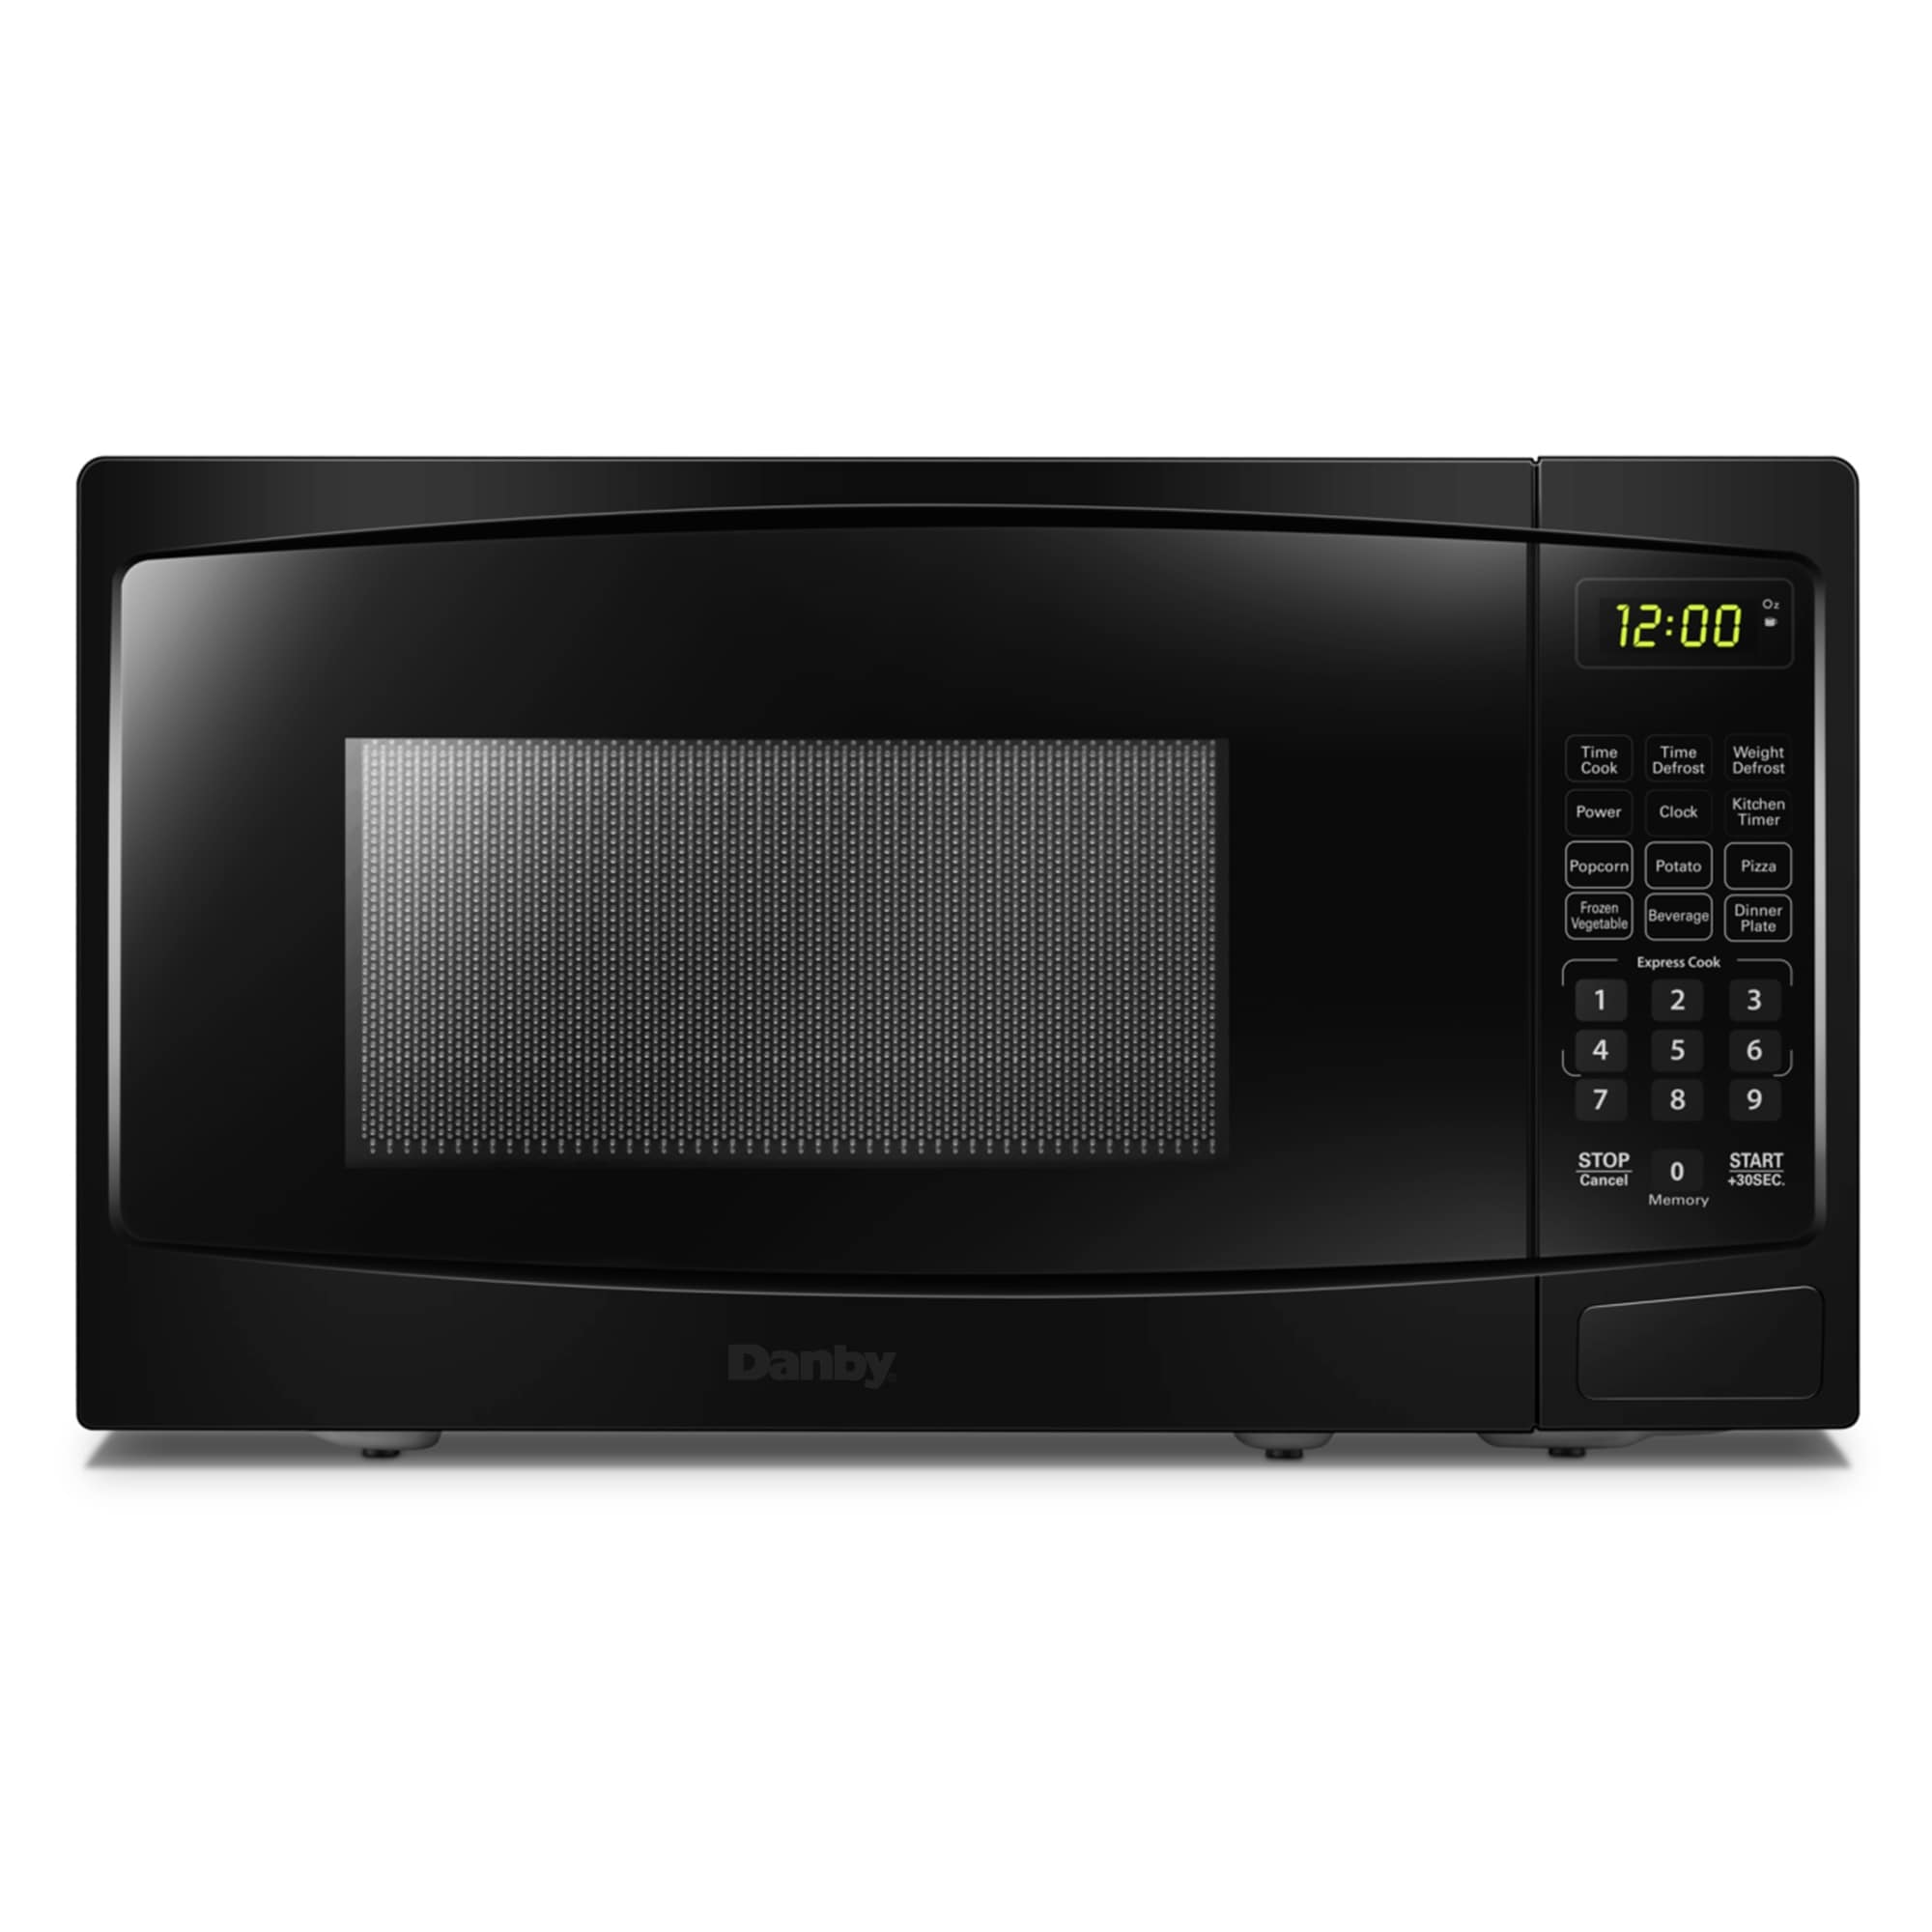 https://ak1.ostkcdn.com/images/products/is/images/direct/1d1db3cbd0a471c28a21d18bc4e6ddffb0a64156/Danby-0.7-cuft-Black-Microwave.jpg